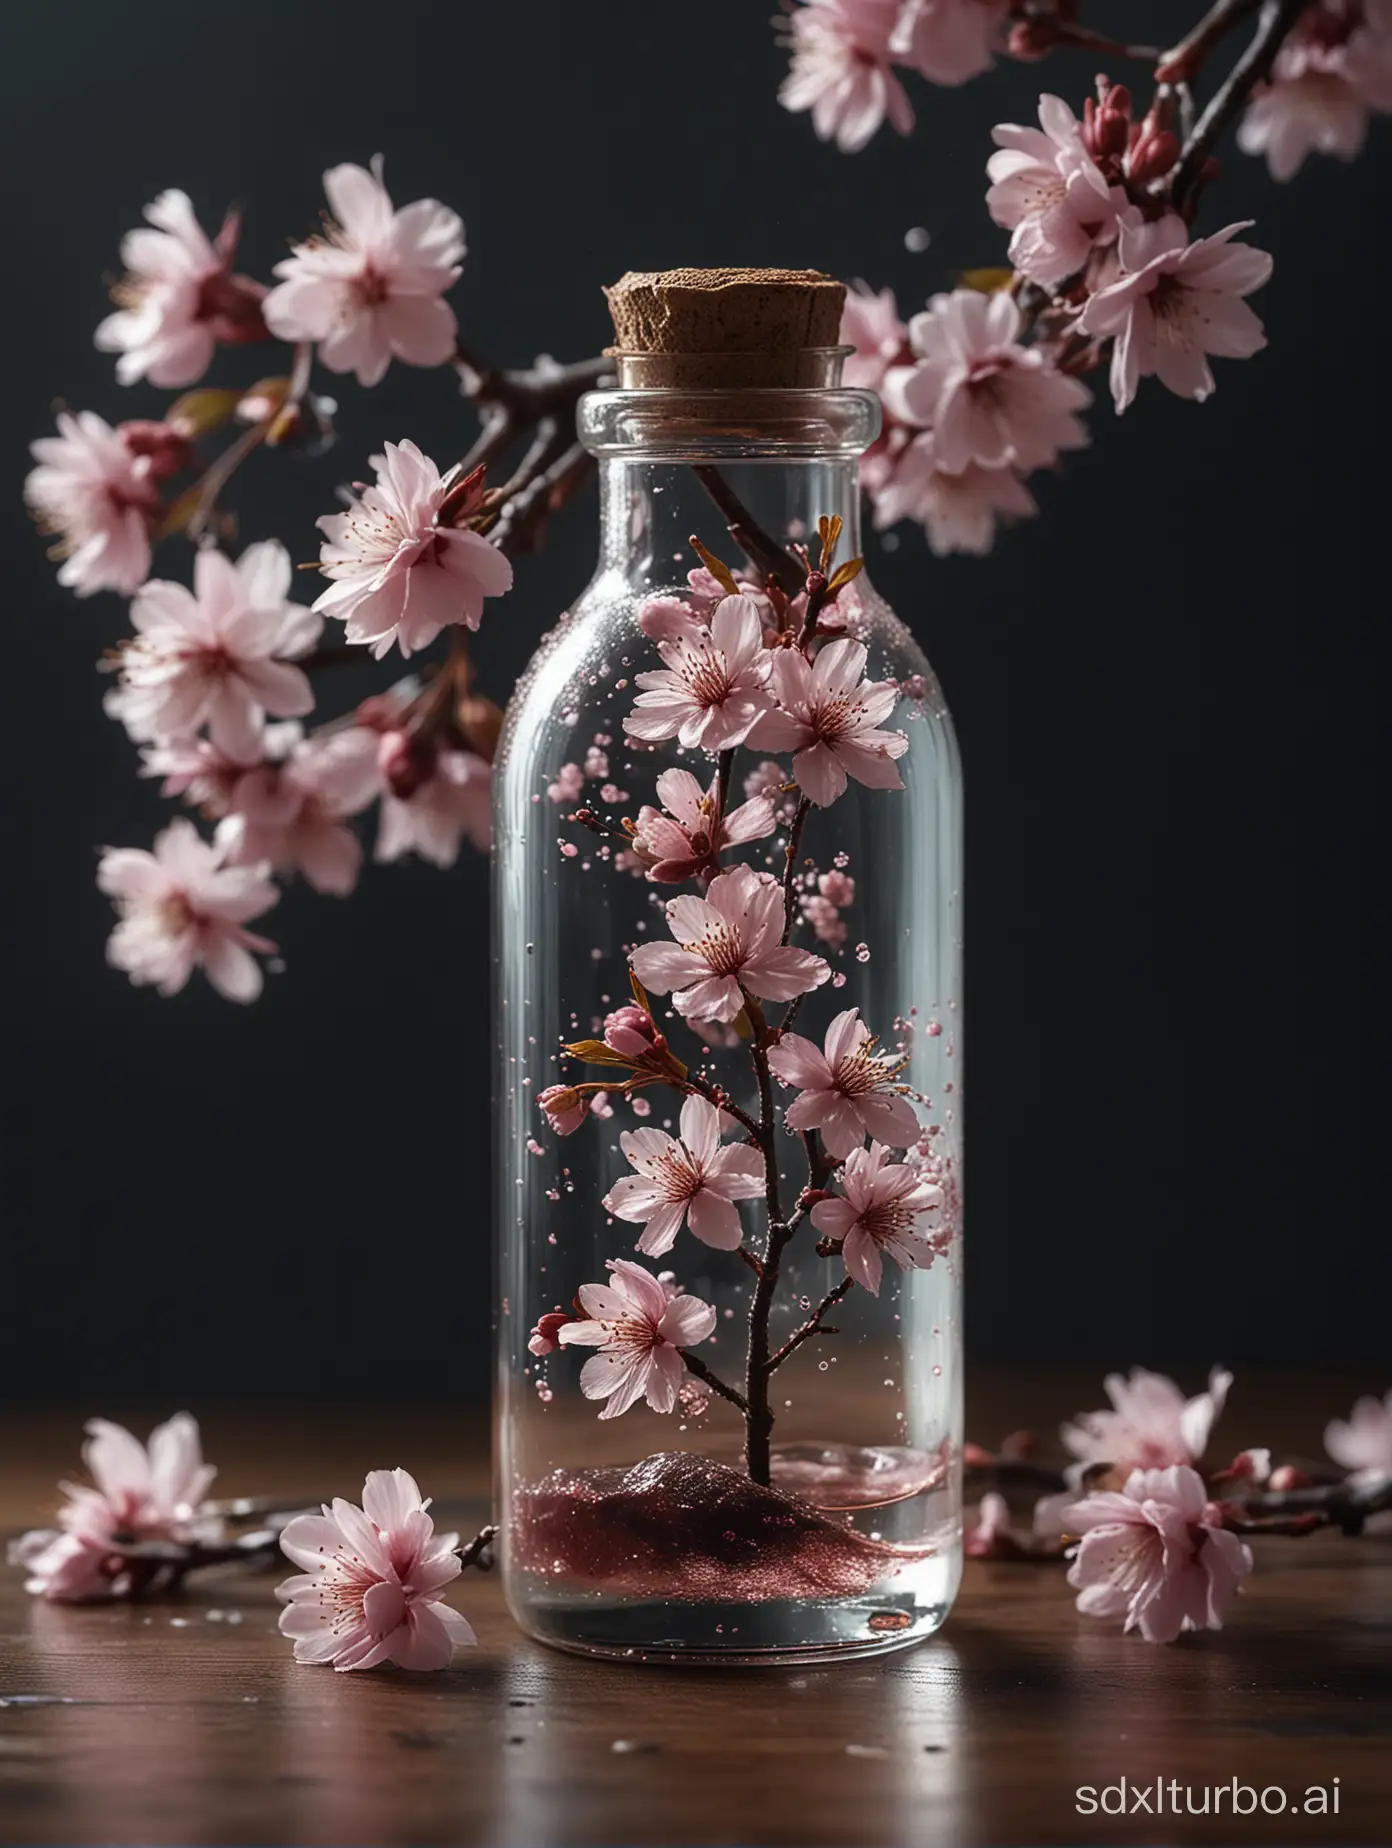 Masterpiece, top quality, super delicate, real, 4K, 8K, cherry blossoms in a bottle, fluffy, realistic, atmospheric light refraction, photographed by Lee Jeffries, Nikon D850 film stock photo 4 Kodak Portra 400 camera f1.6 lens, rich colors, ultra realistic textures, dramatic lighting, Unreal Engine trend on ArtStation Cinestill 800, style glass